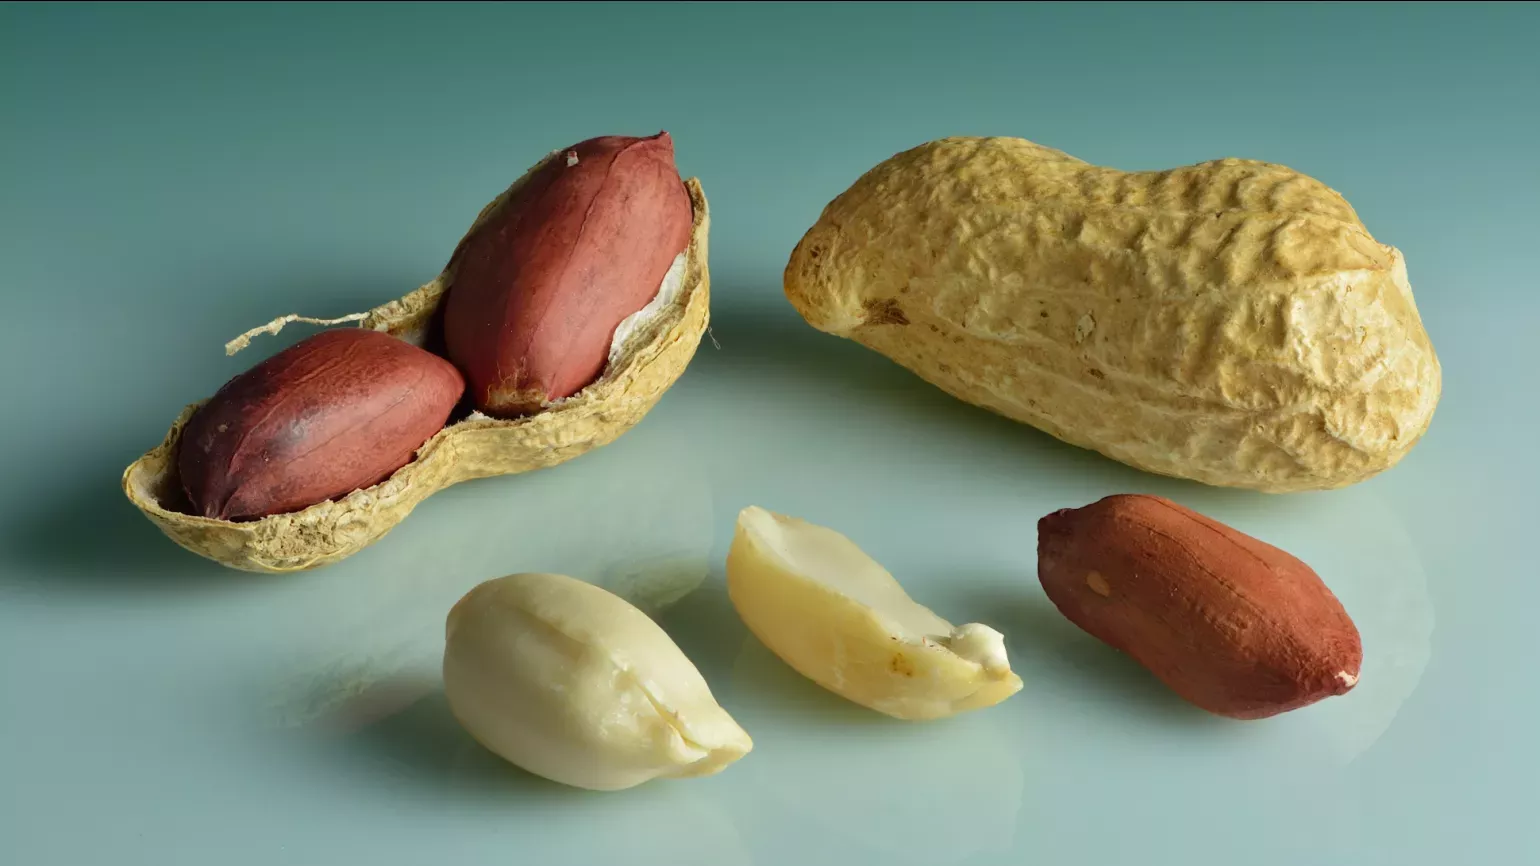 A peanut shell opened to reveal the smaller seed inside